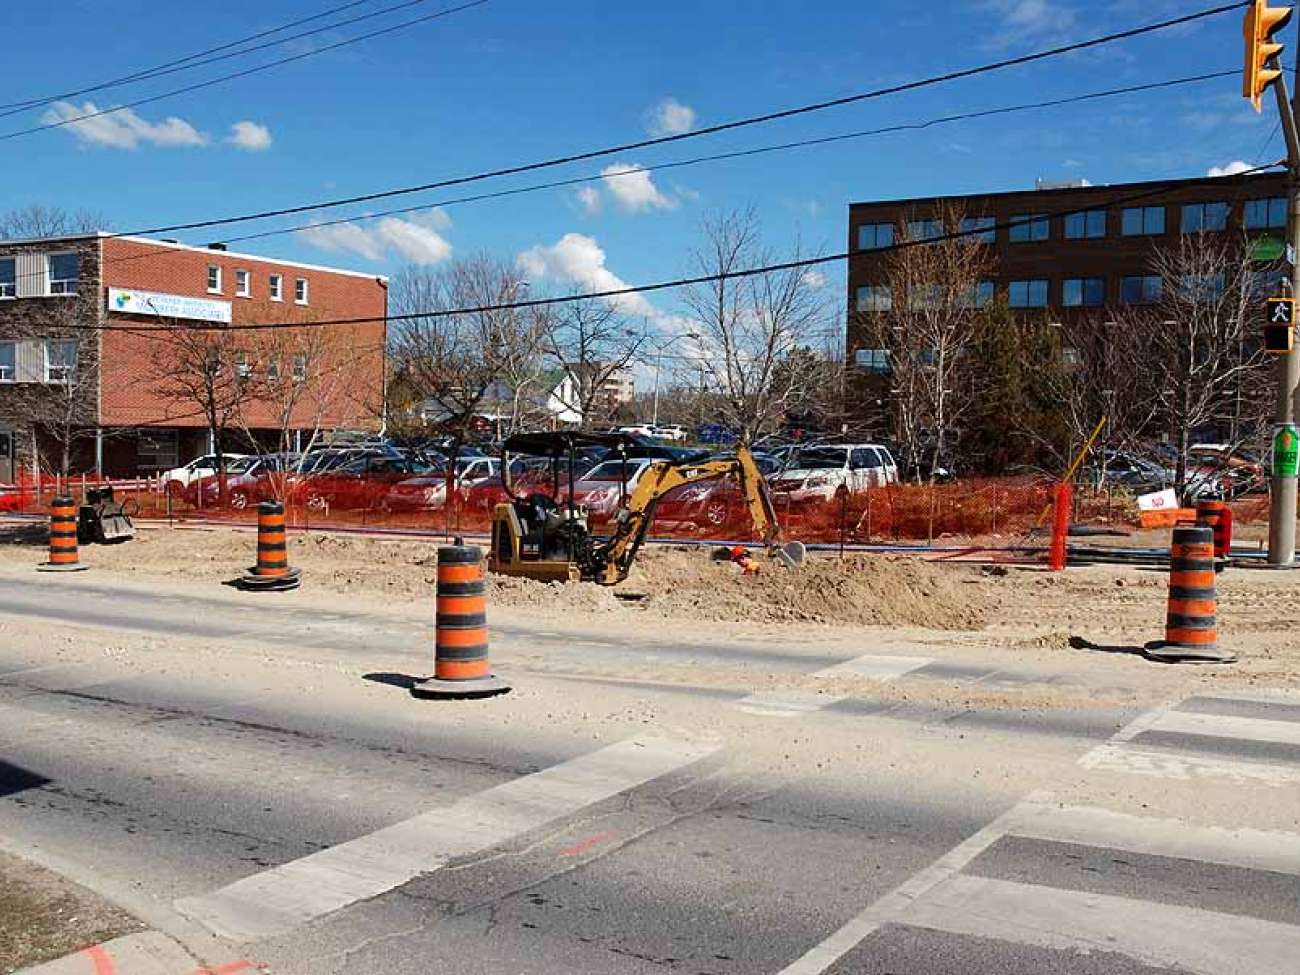 May 2015: street demolition and reconstruction underway